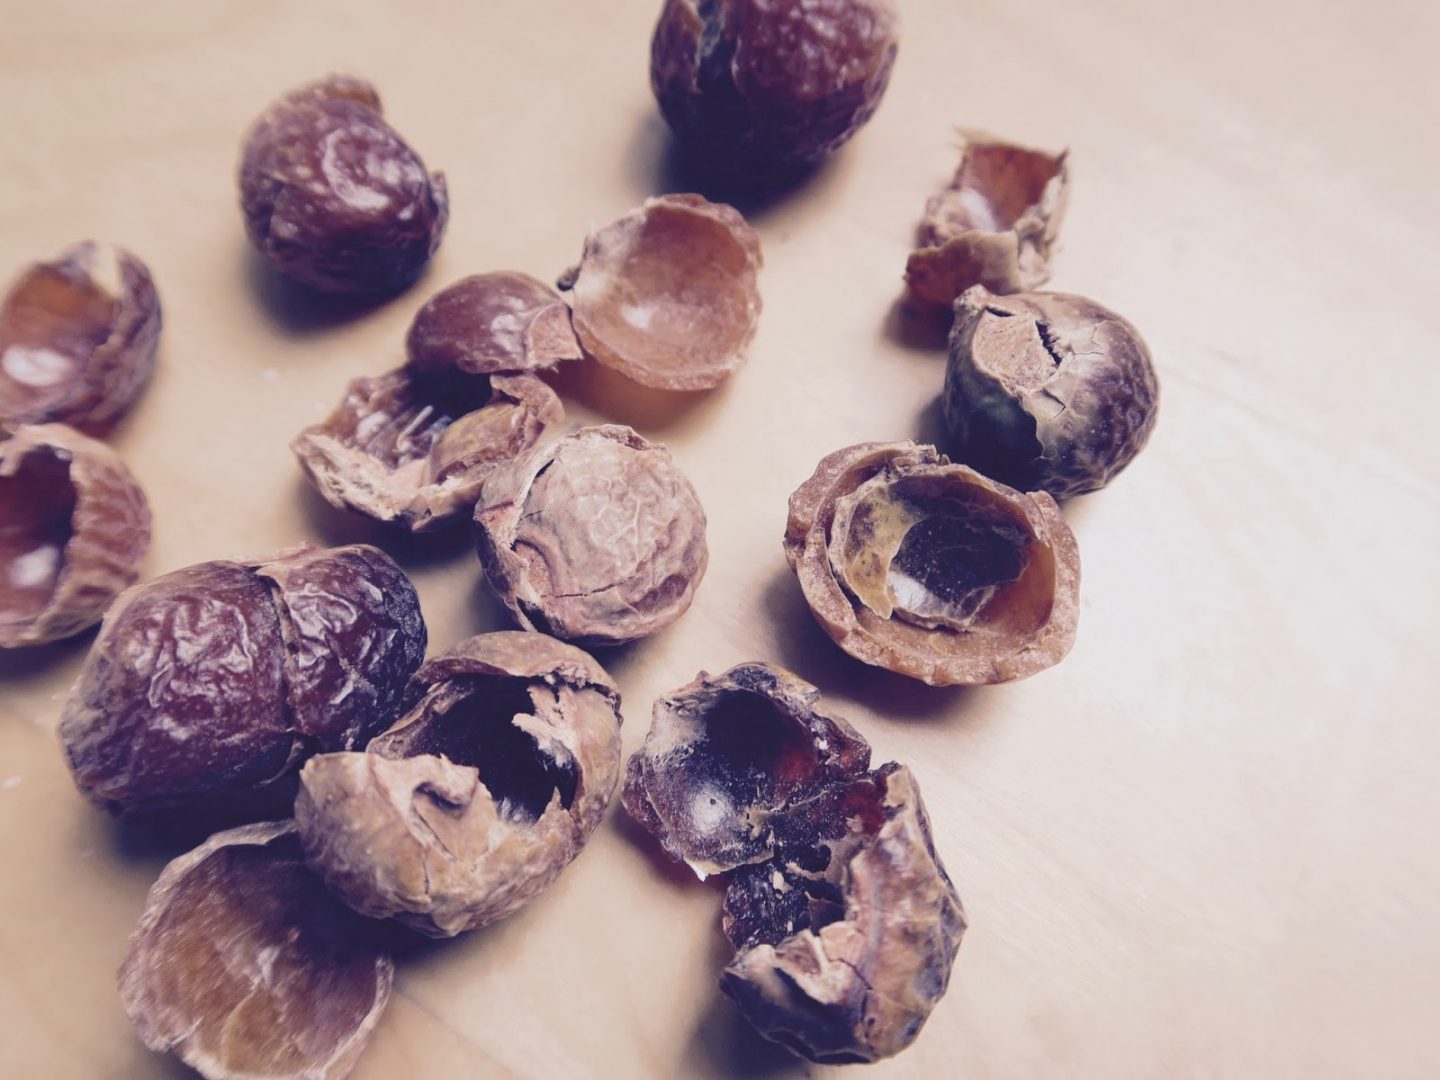 What are soap nuts? | Curiously Conscious